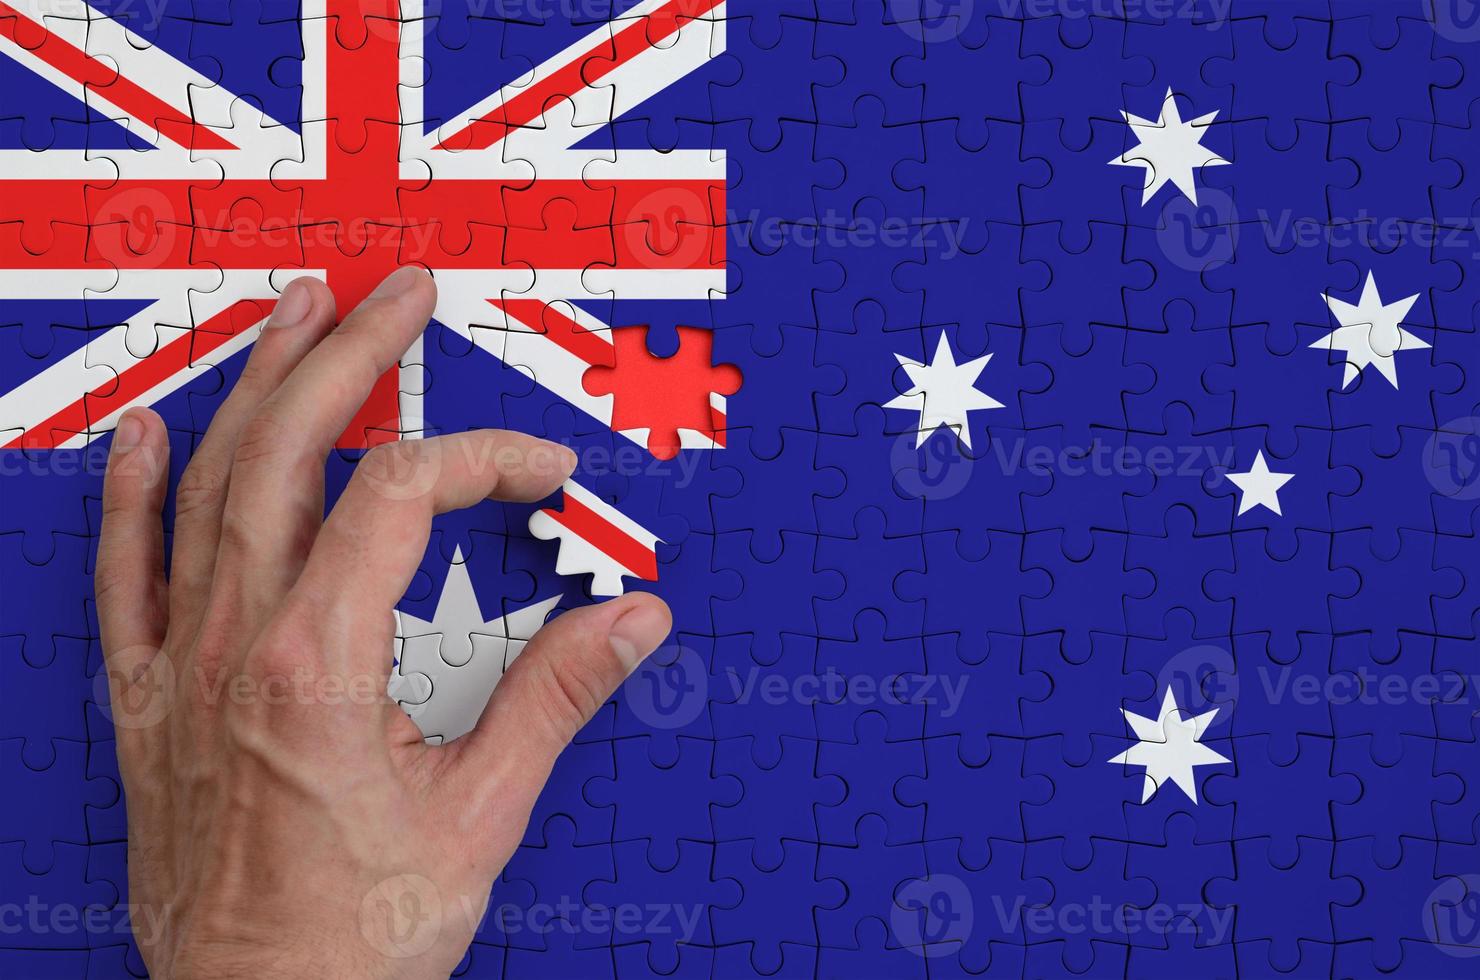 Australia flag is depicted on a puzzle, which the man's hand completes to fold photo